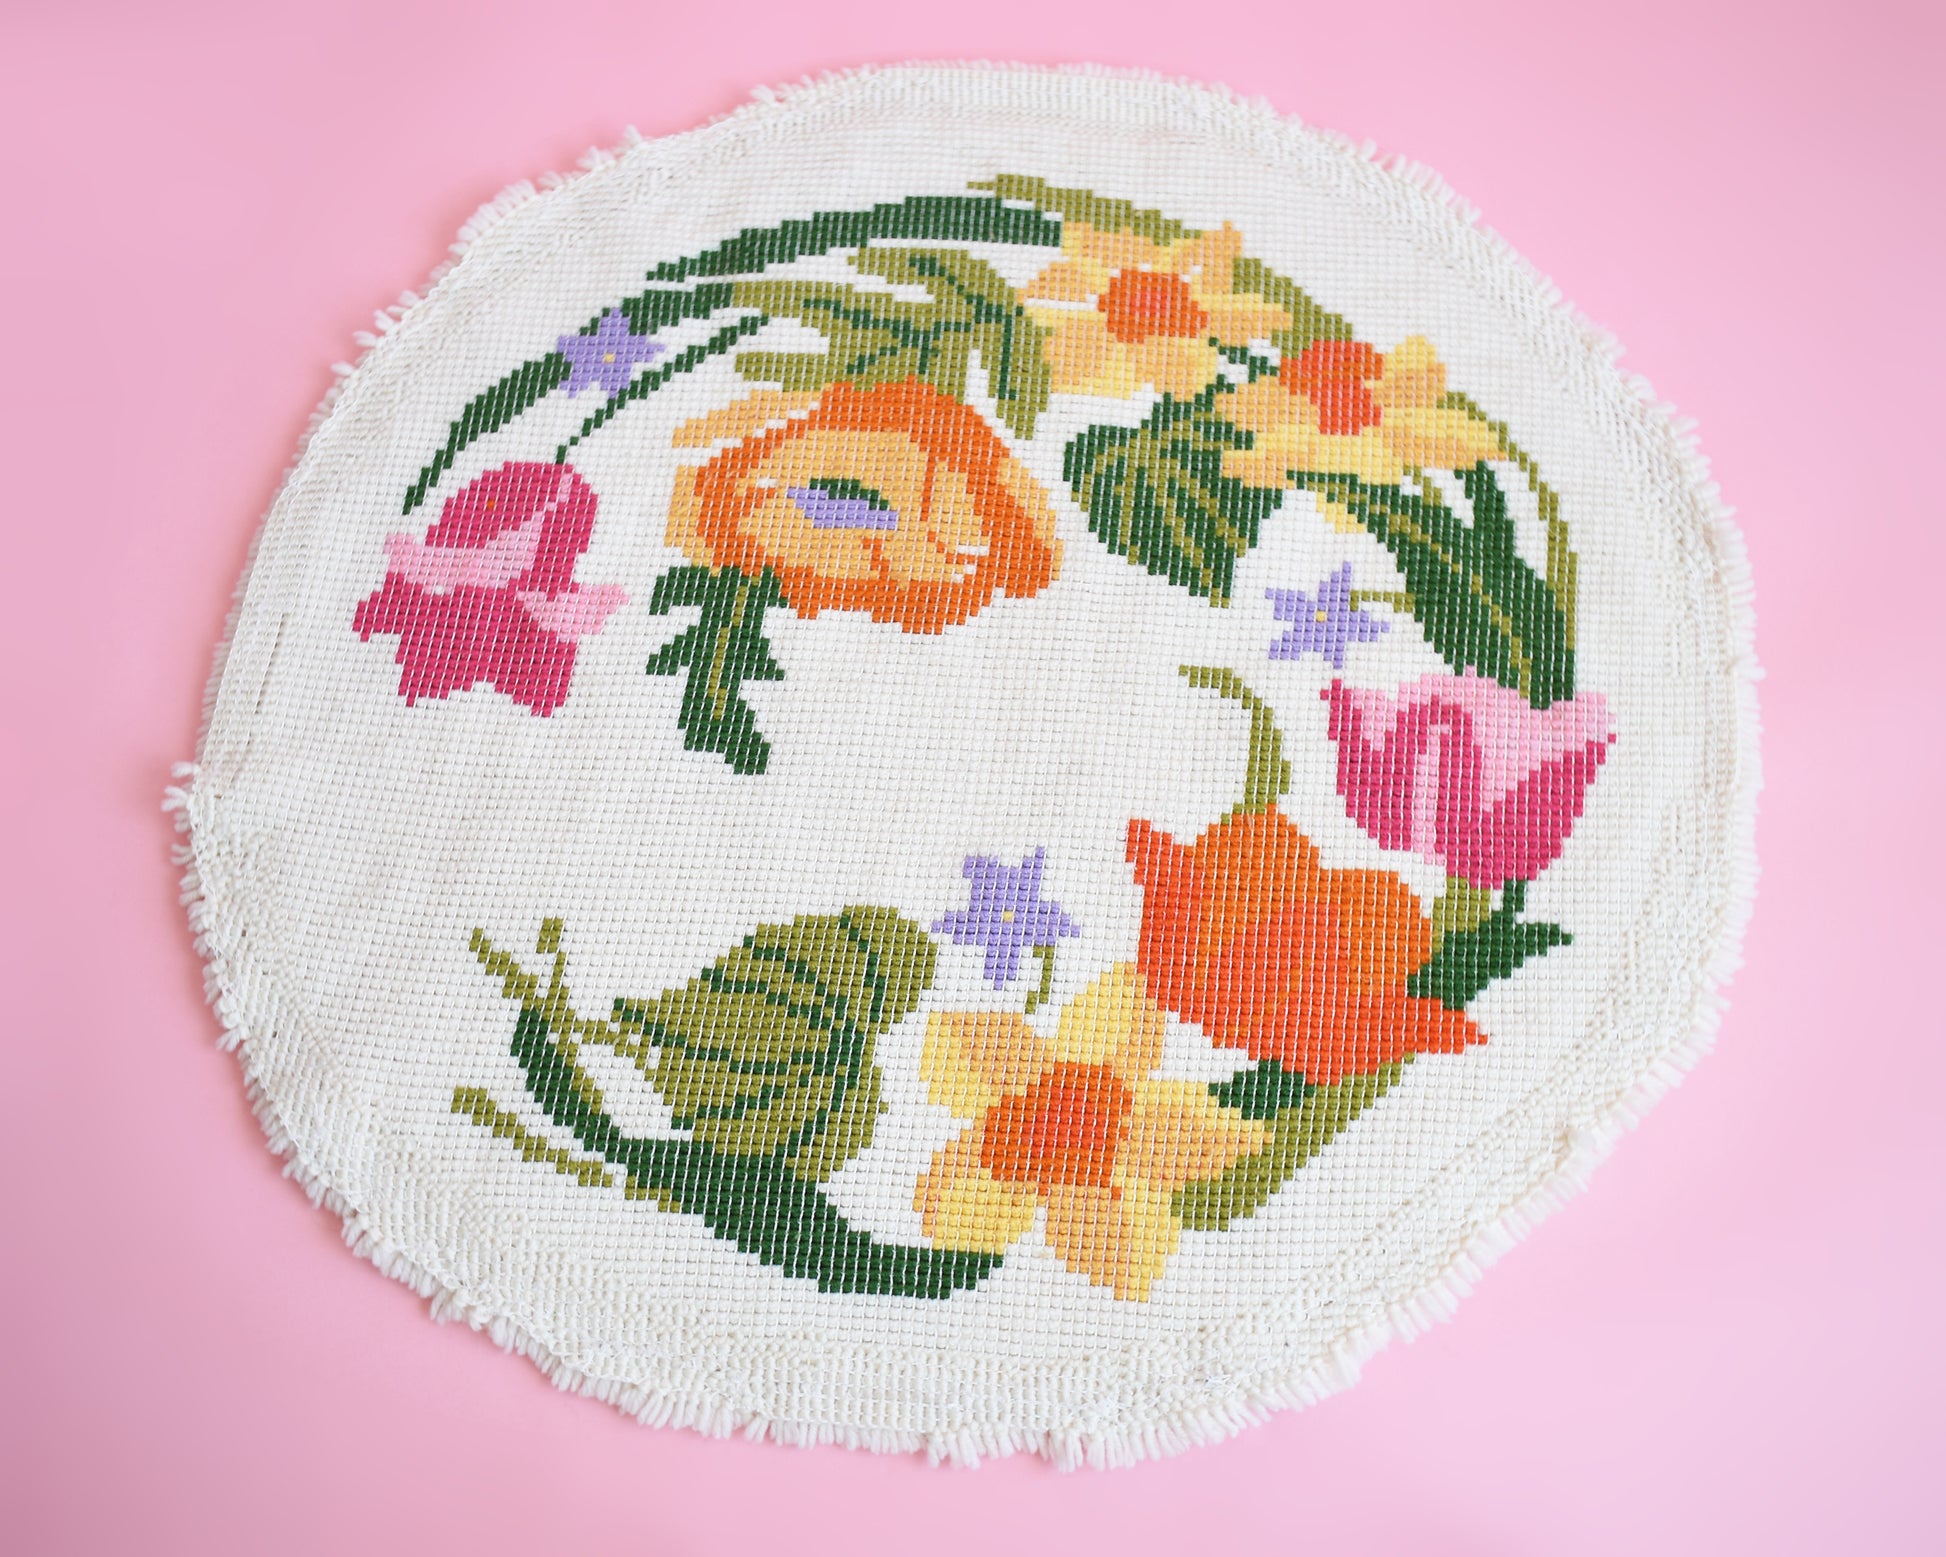 Back view of a vintage round floral latch hook rug that has cream white shaggy acrylic with a colorful floral motif in pinks, orange, yellow, purple and greens. The rug is on a pink background.